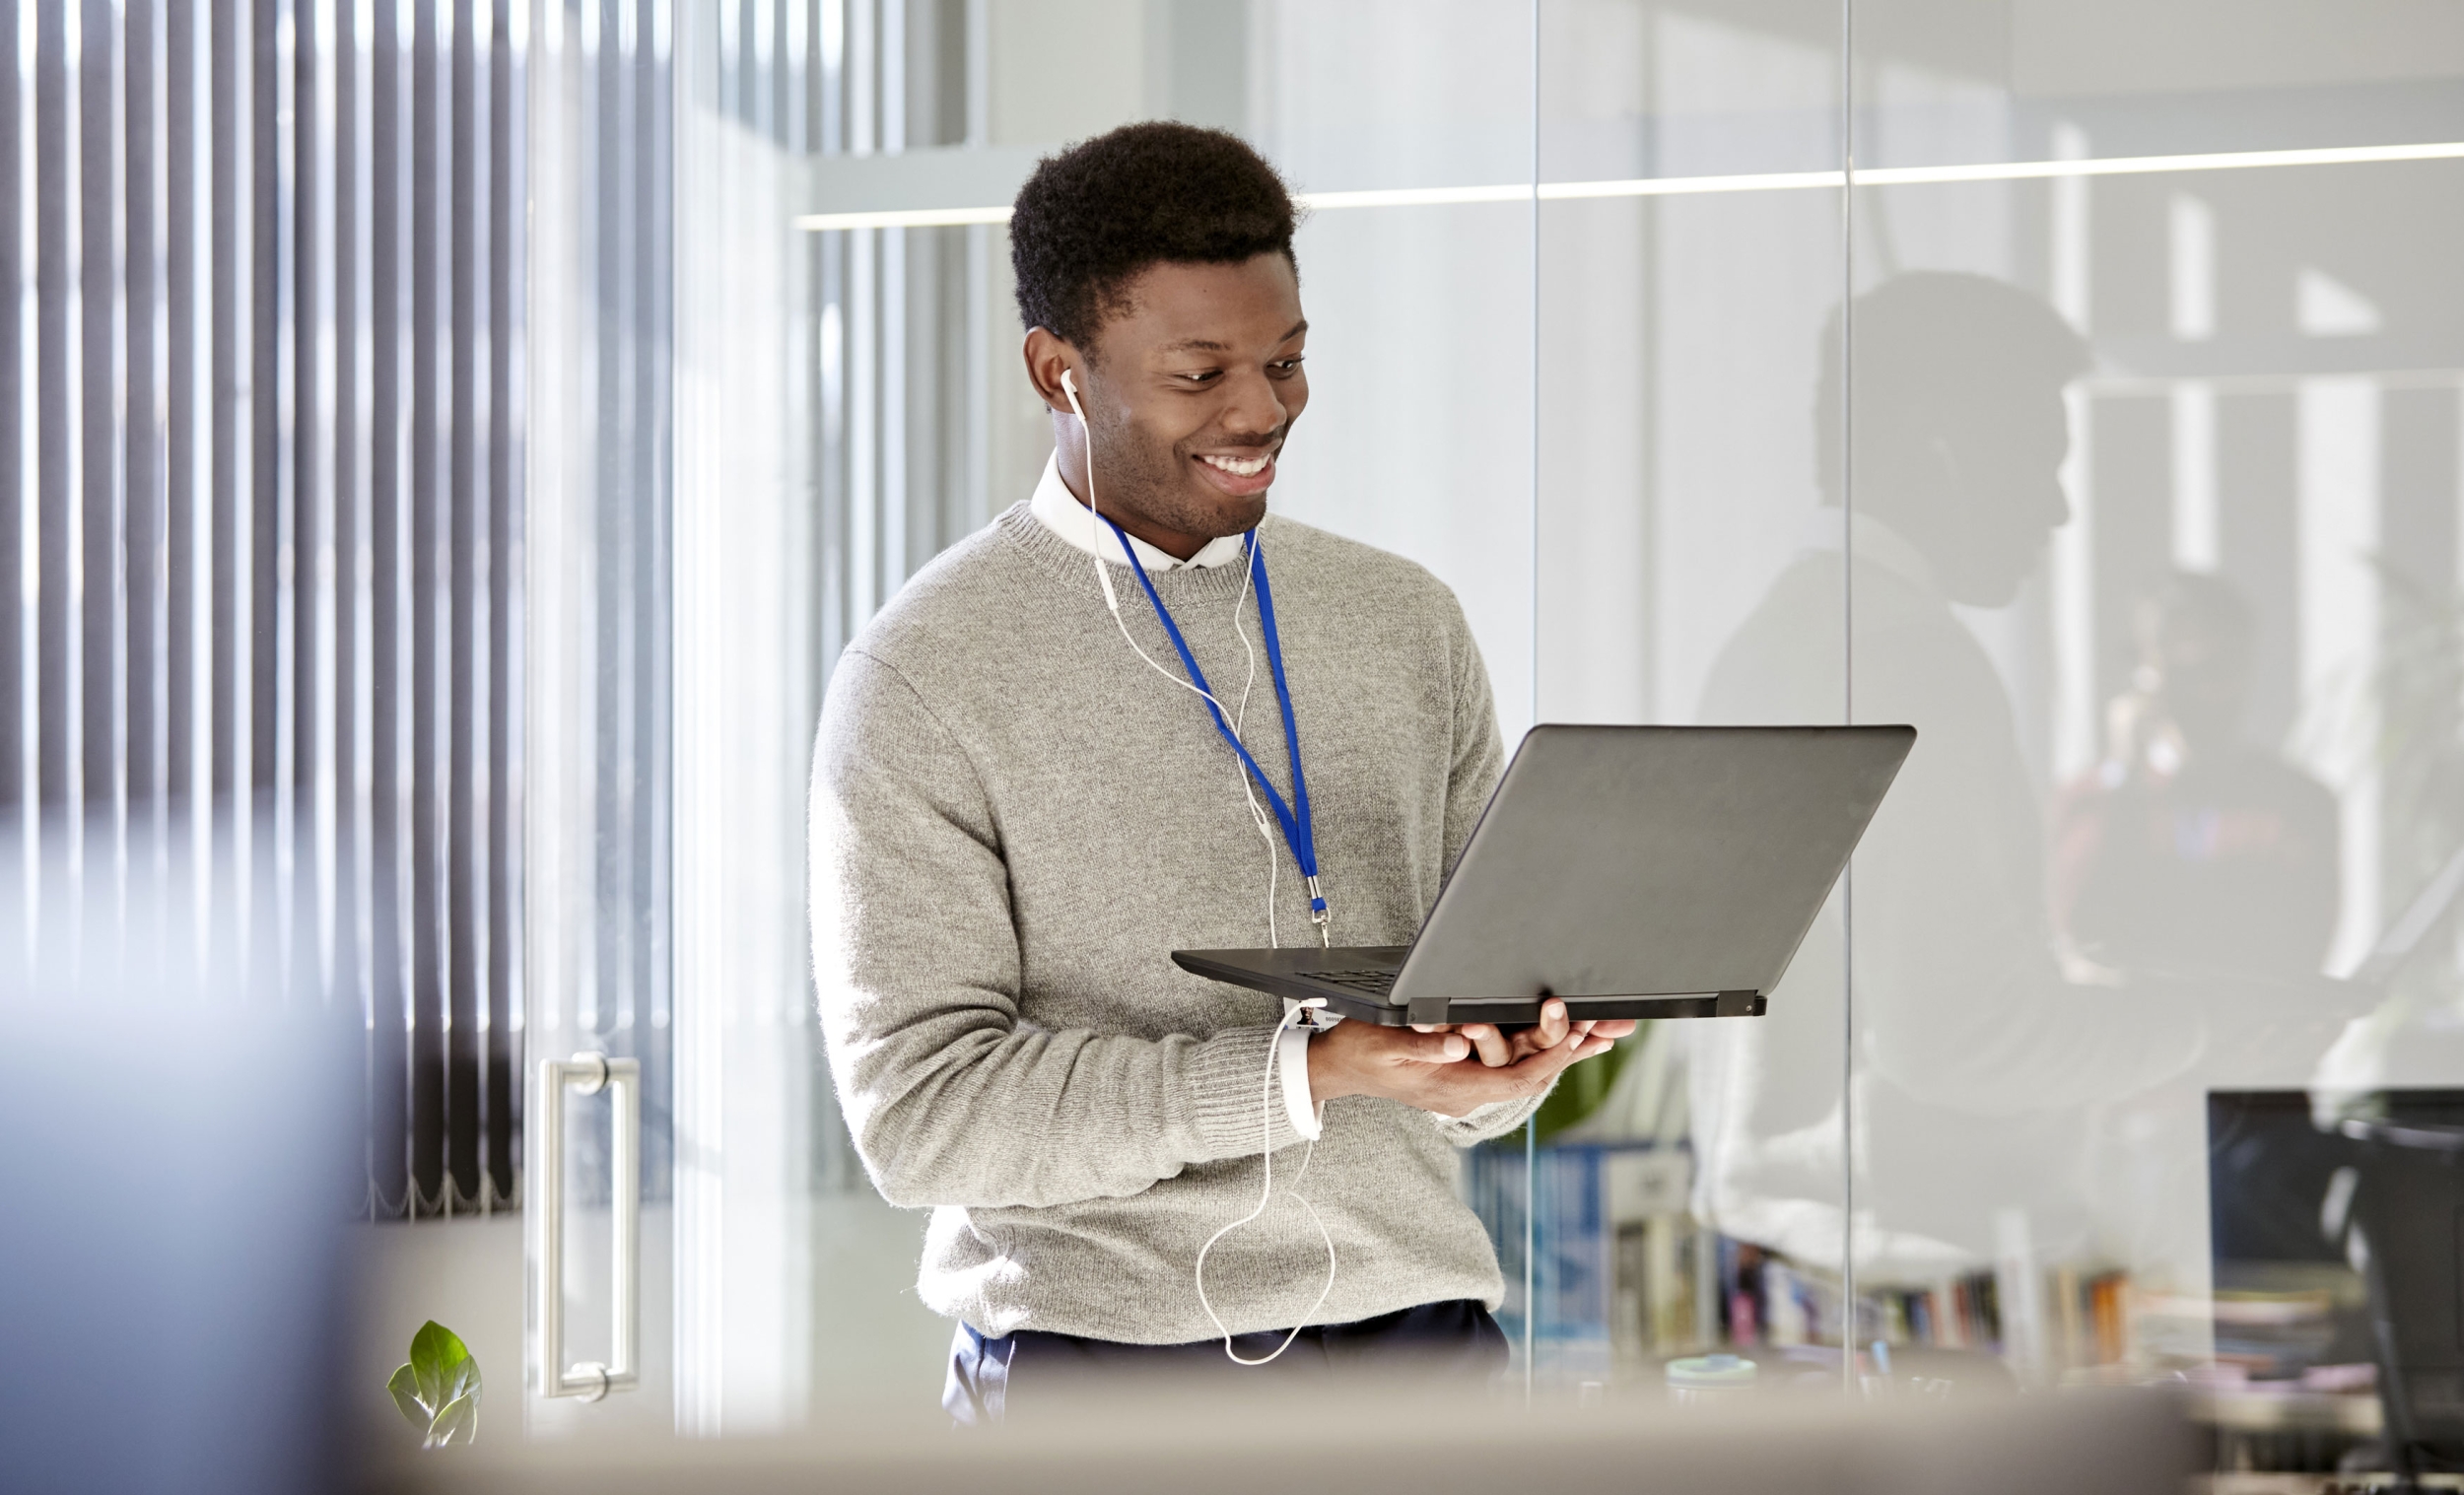 Young black business man wearing a grey jumper and a purple keycord in an office environment. He is holding up a laptop, wearing headphones and smiling at the laptop camera.